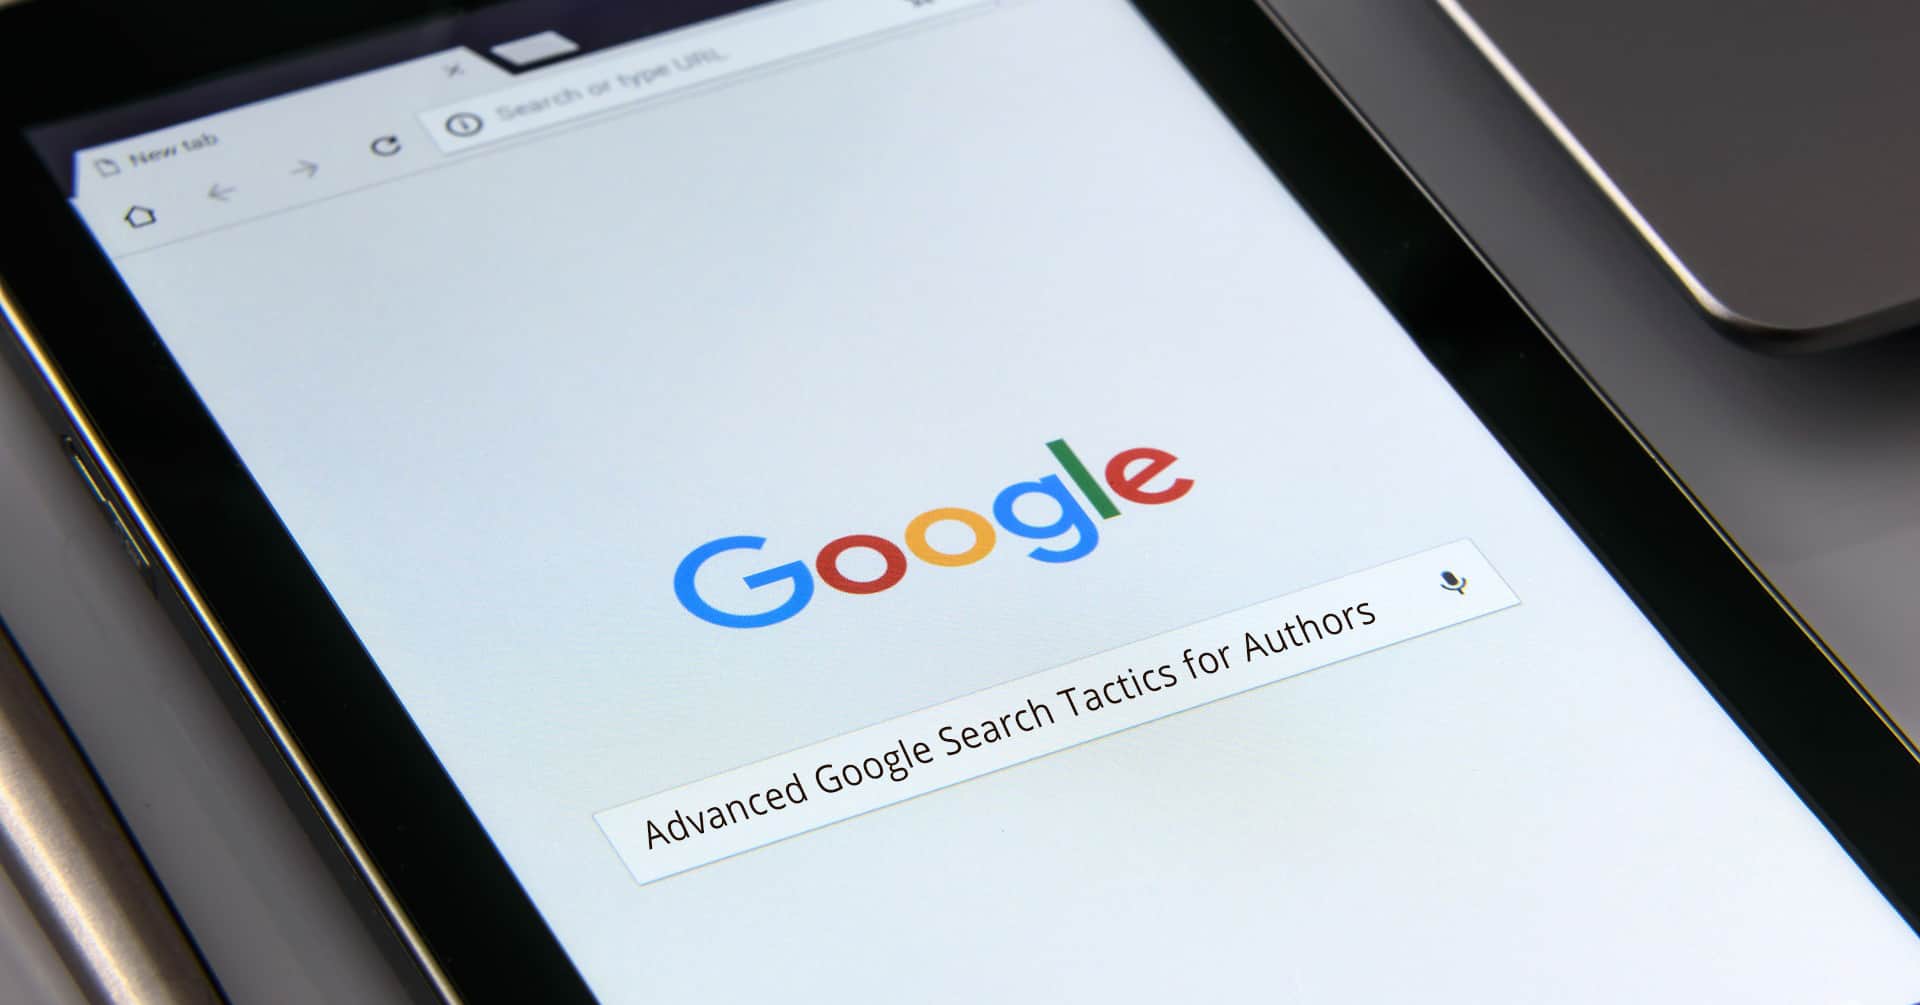 google search tactics for authors